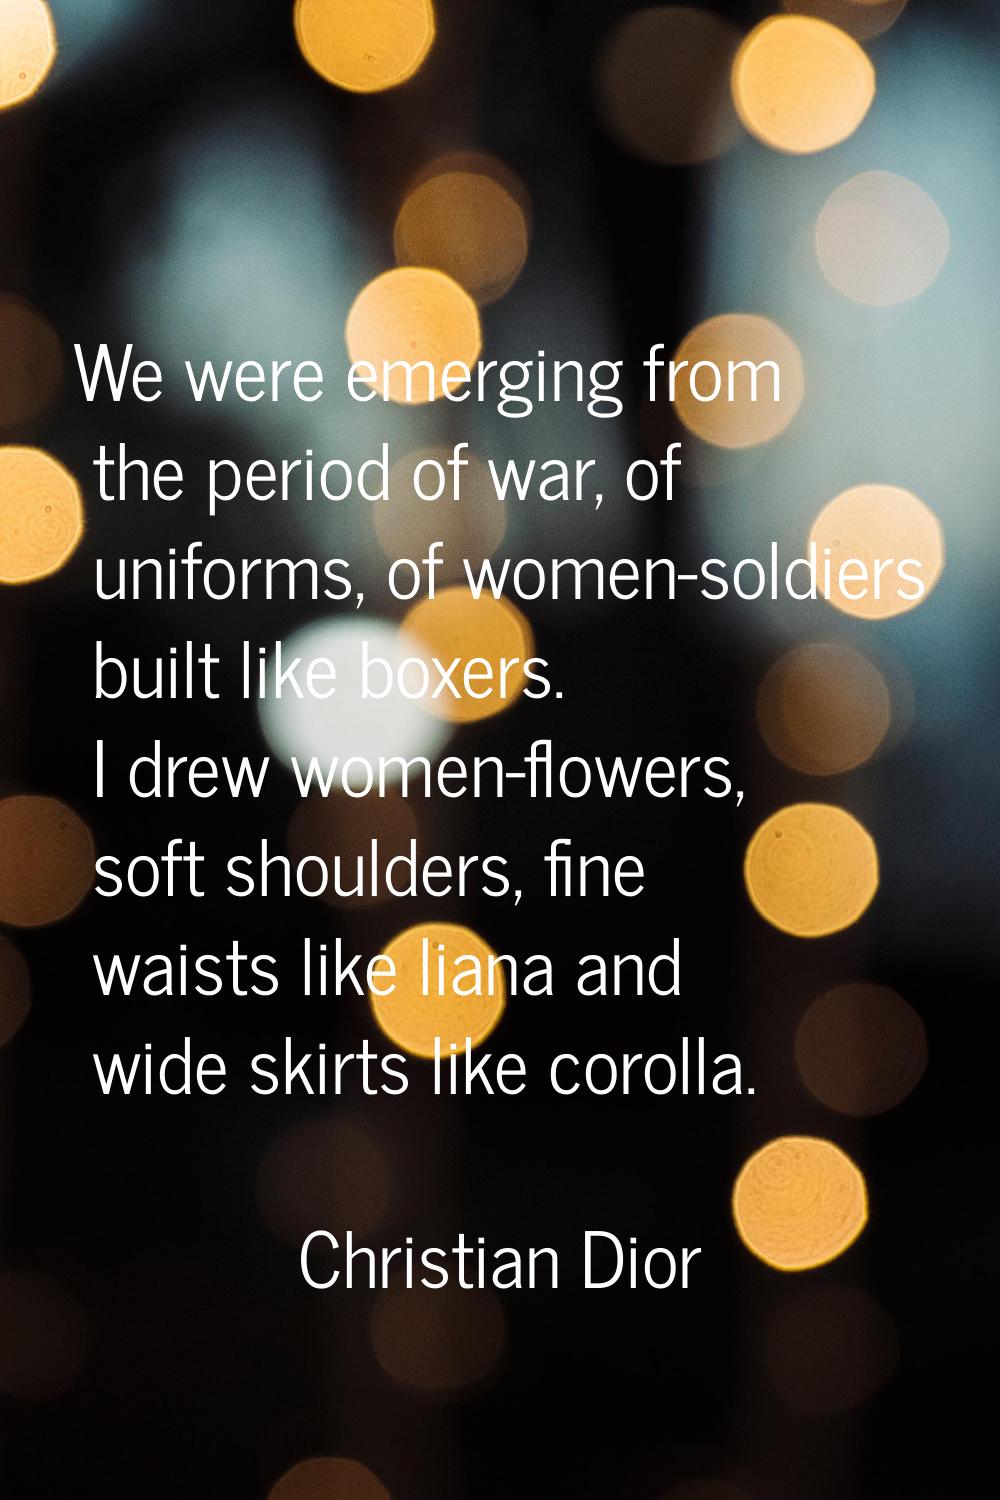 We were emerging from the period of war, of uniforms, of women-soldiers built like boxers. I drew w